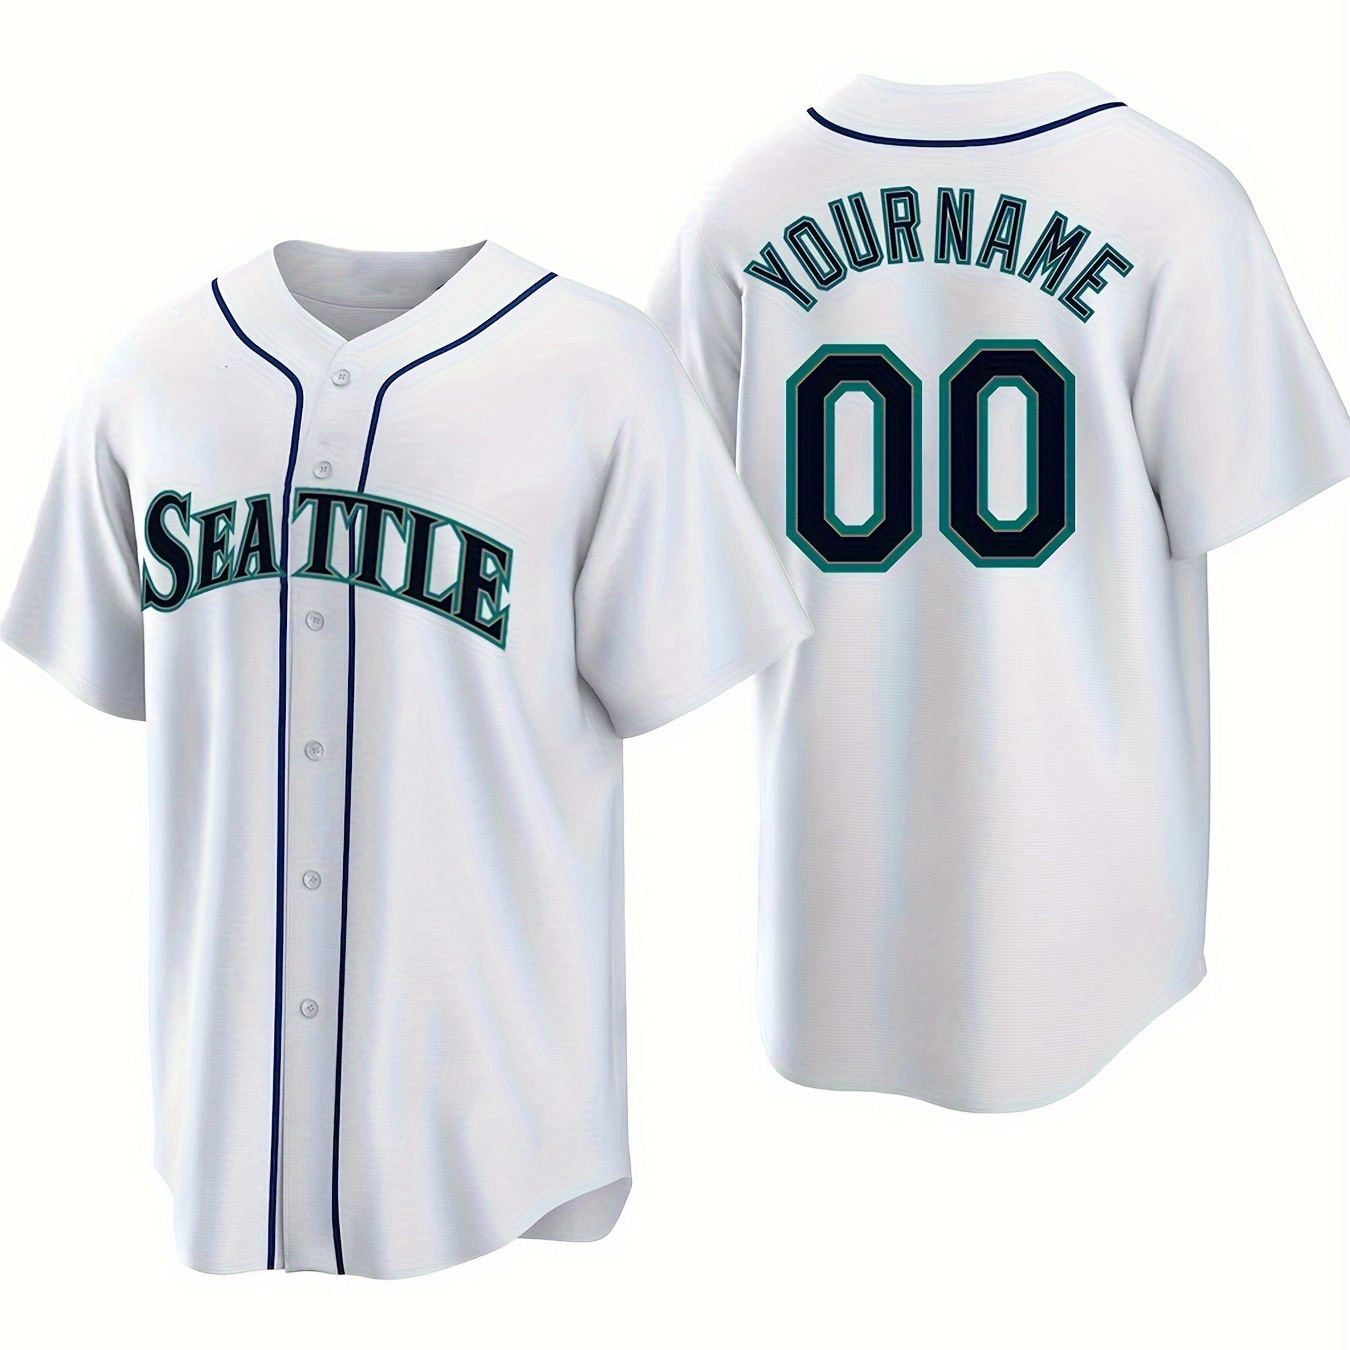 

Men's Personalized Custom Name & Numbers Baseball Jersey, Seattle Graphic Print Baseball Jersey Shirt, Competition Party Training Button Up Shirt